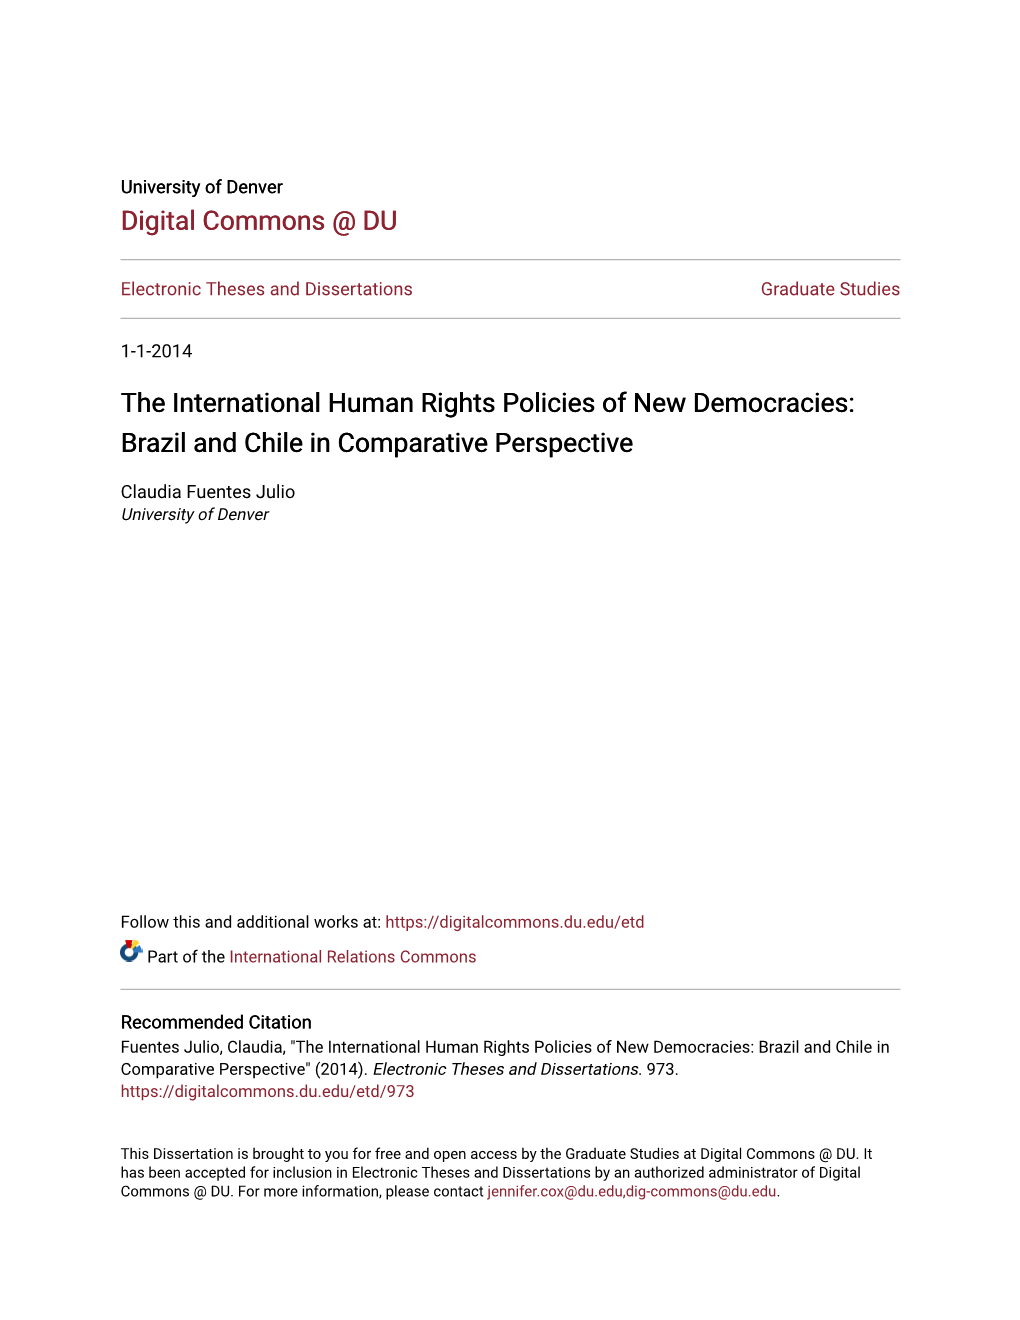 The International Human Rights Policies of New Democracies: Brazil and Chile in Comparative Perspective